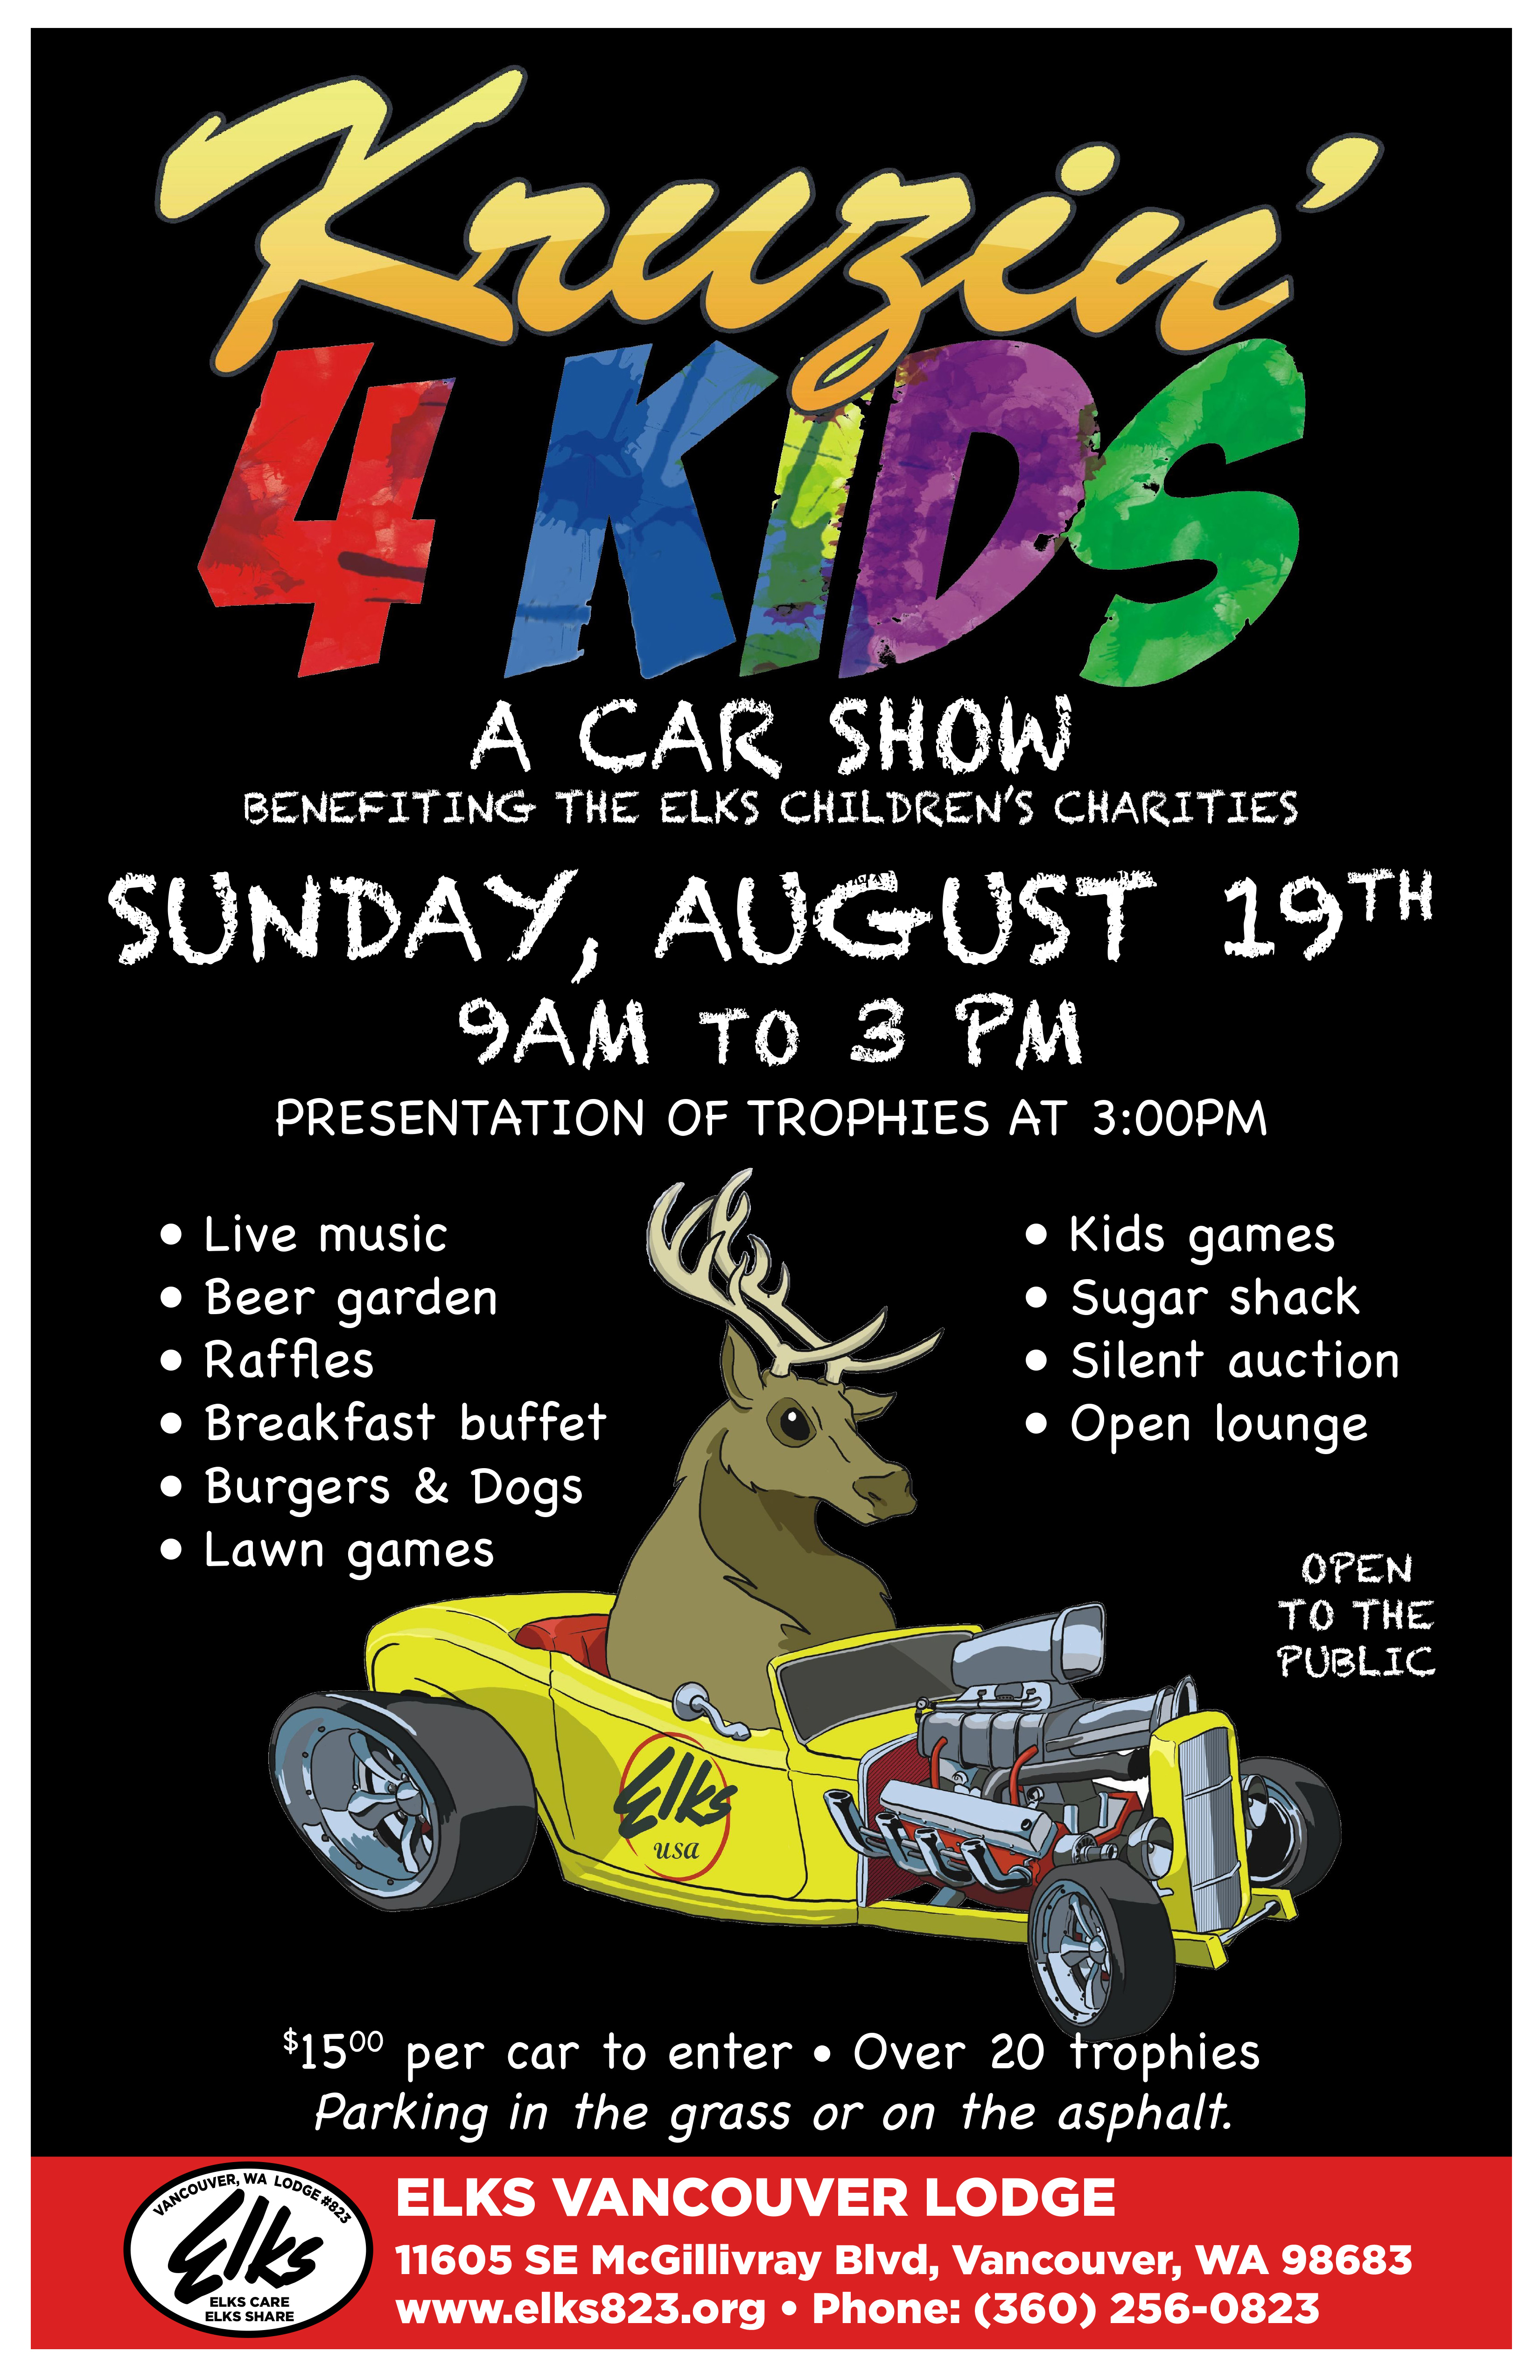 Car show poster.indd